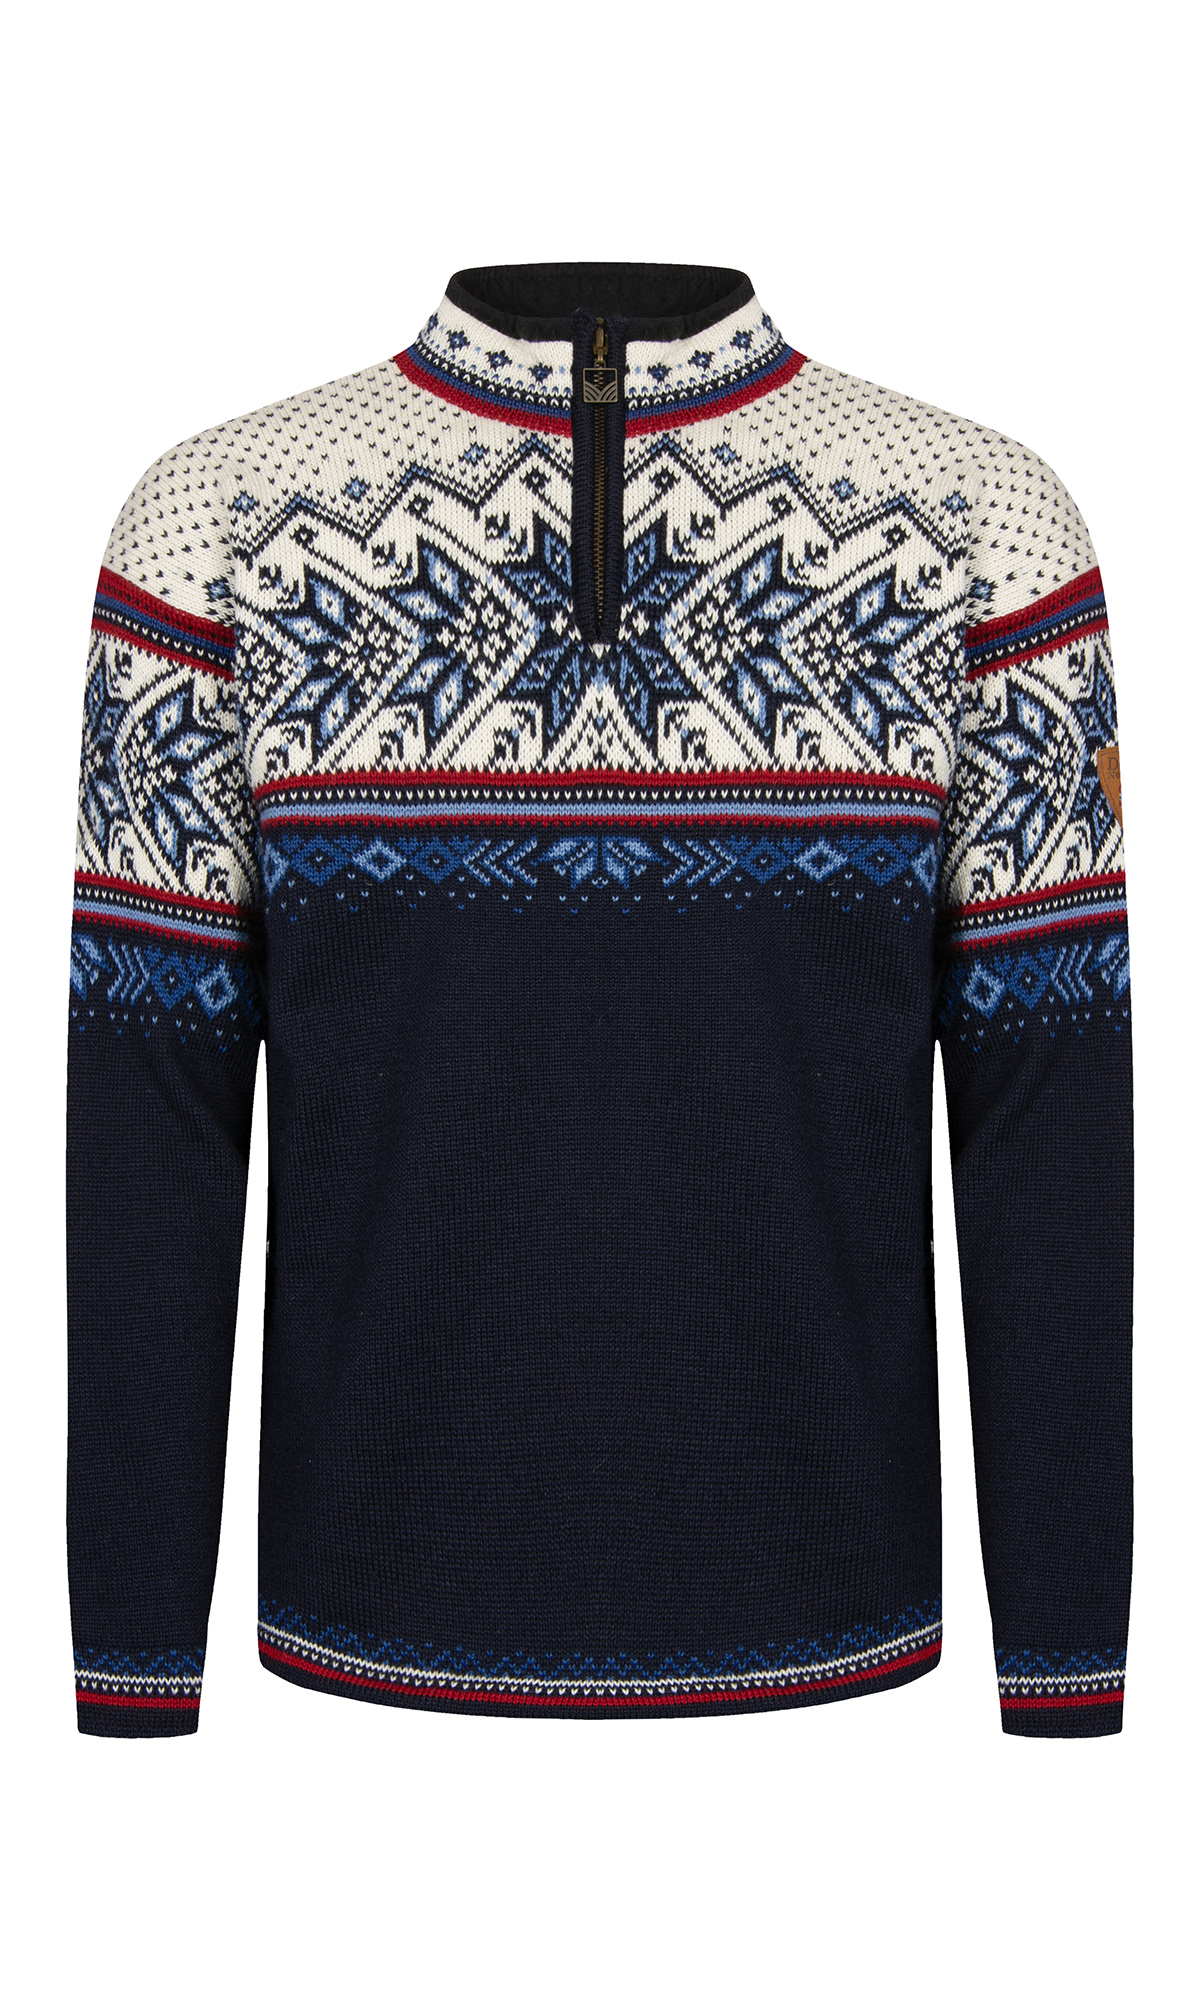 Vail Sweater - Men - Navy - Dale of Norway - Dale of Norway